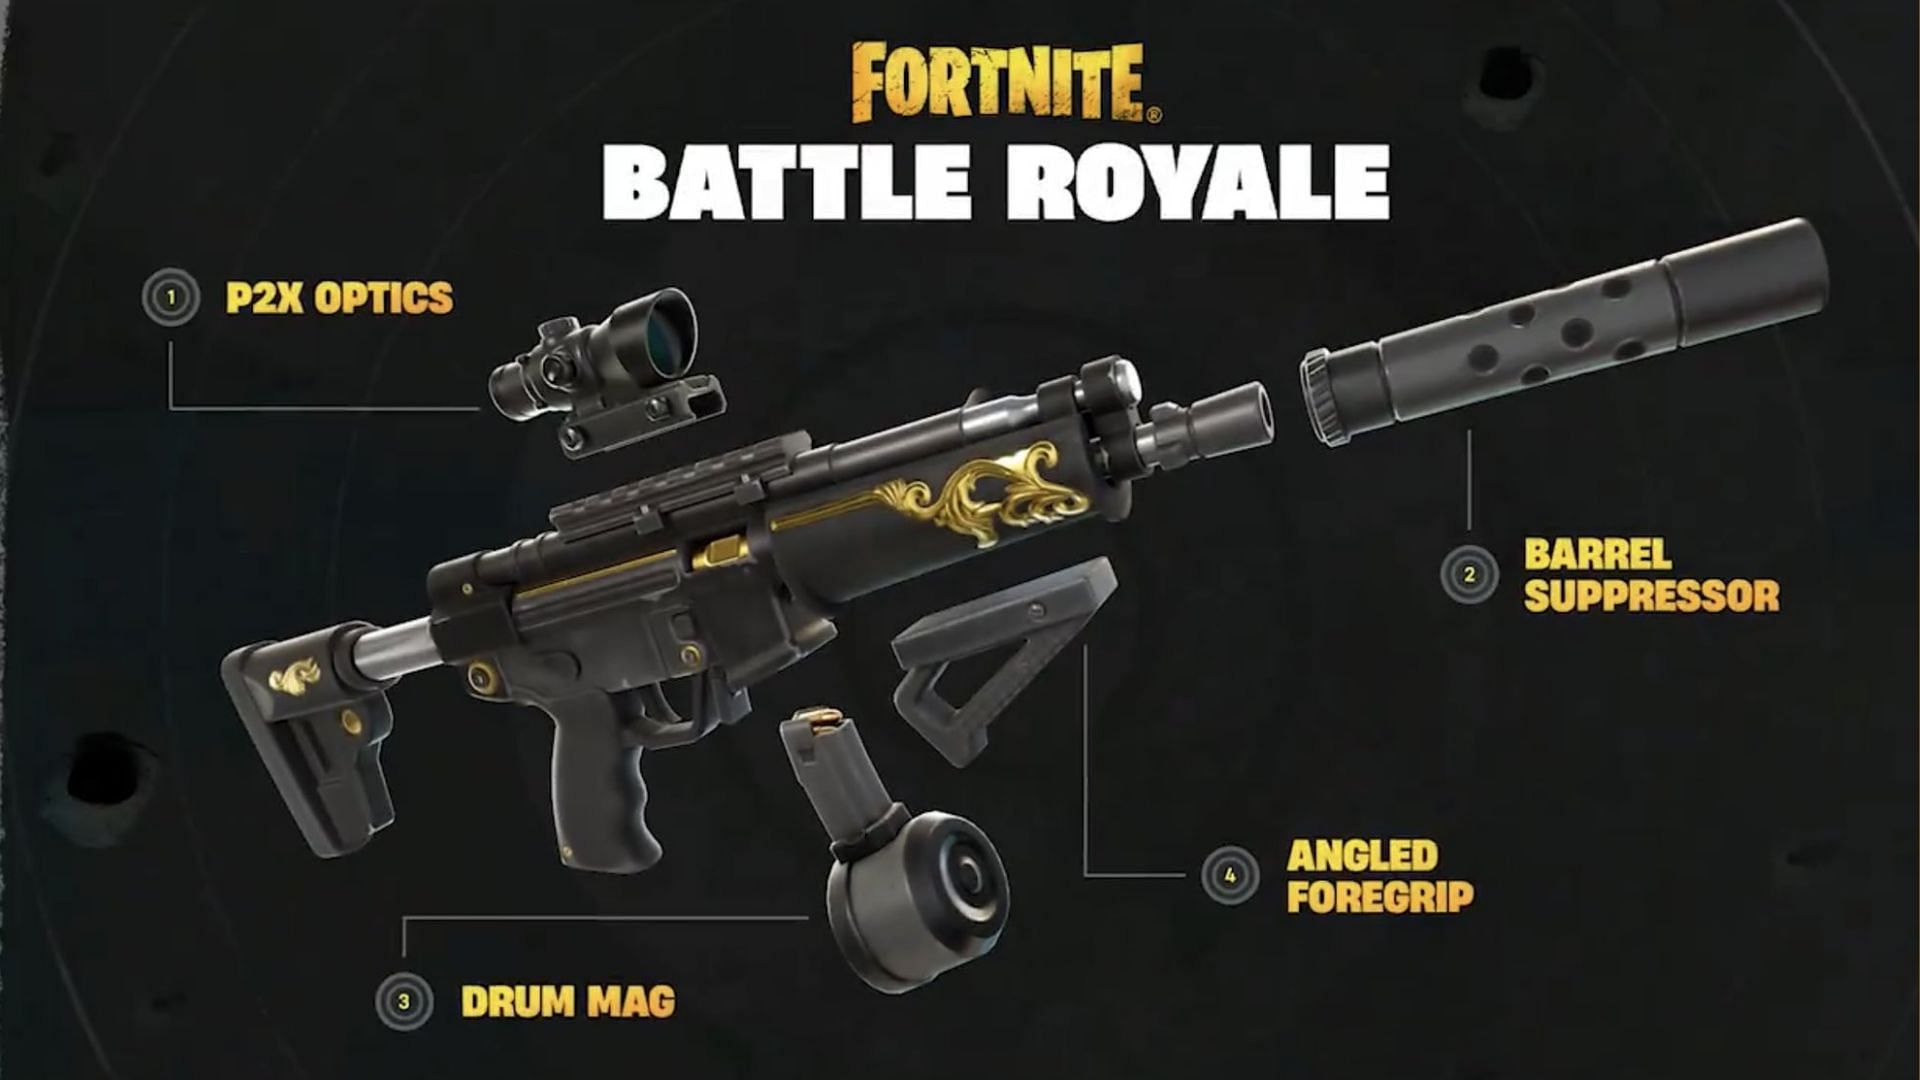 Fortnite Weapons Mods have a major drawback, but it